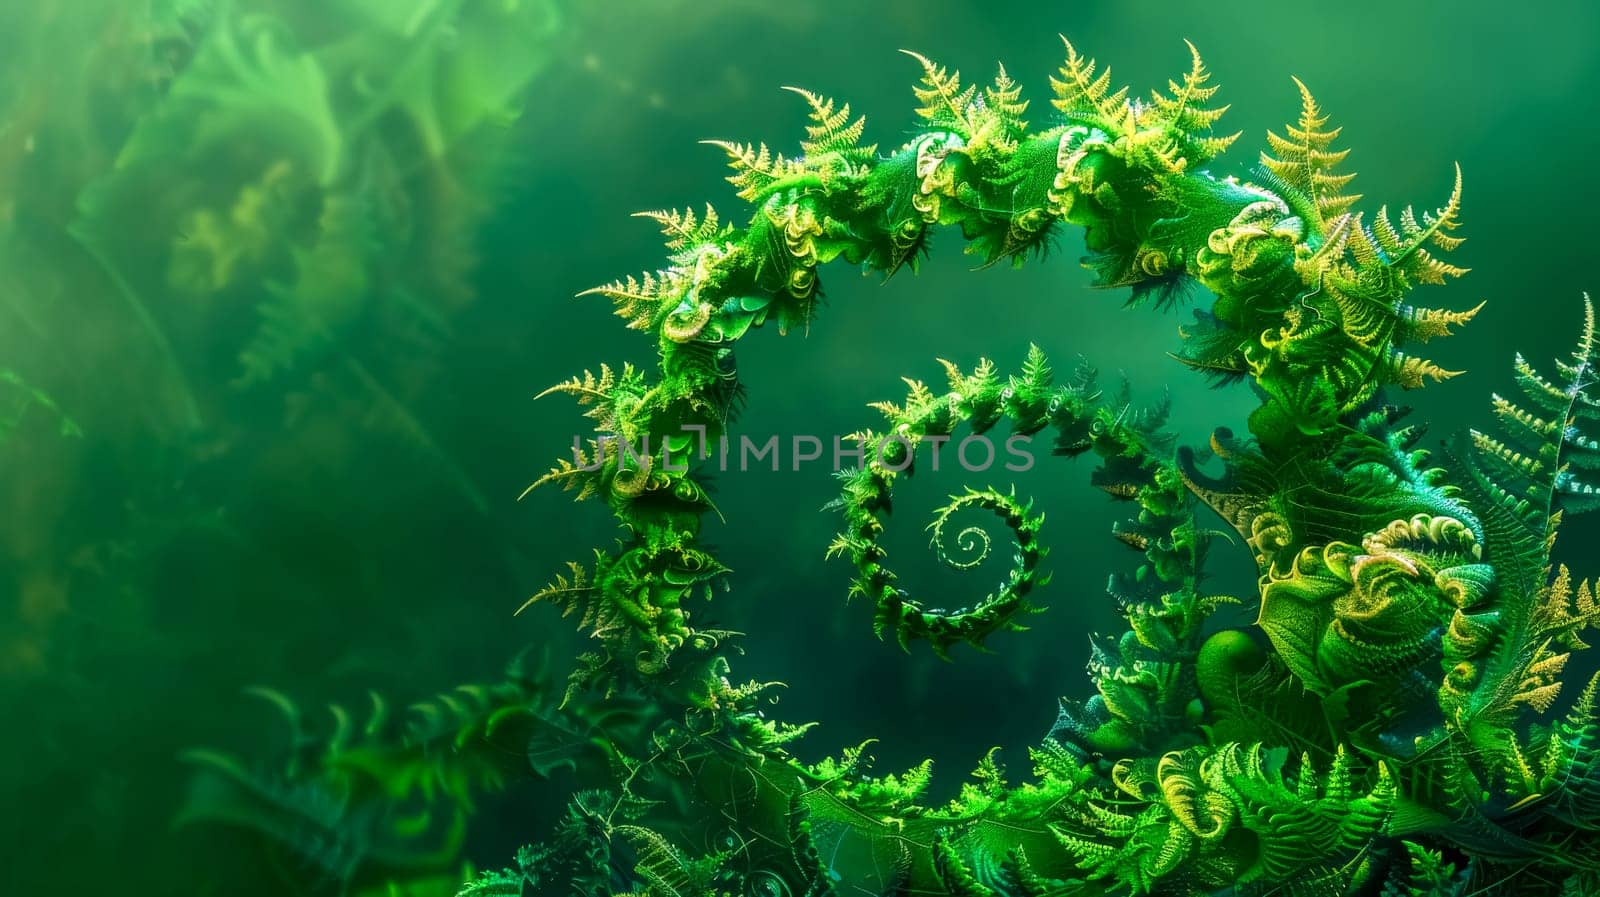 Enchanted underwater seascape with green coral swirls by Edophoto